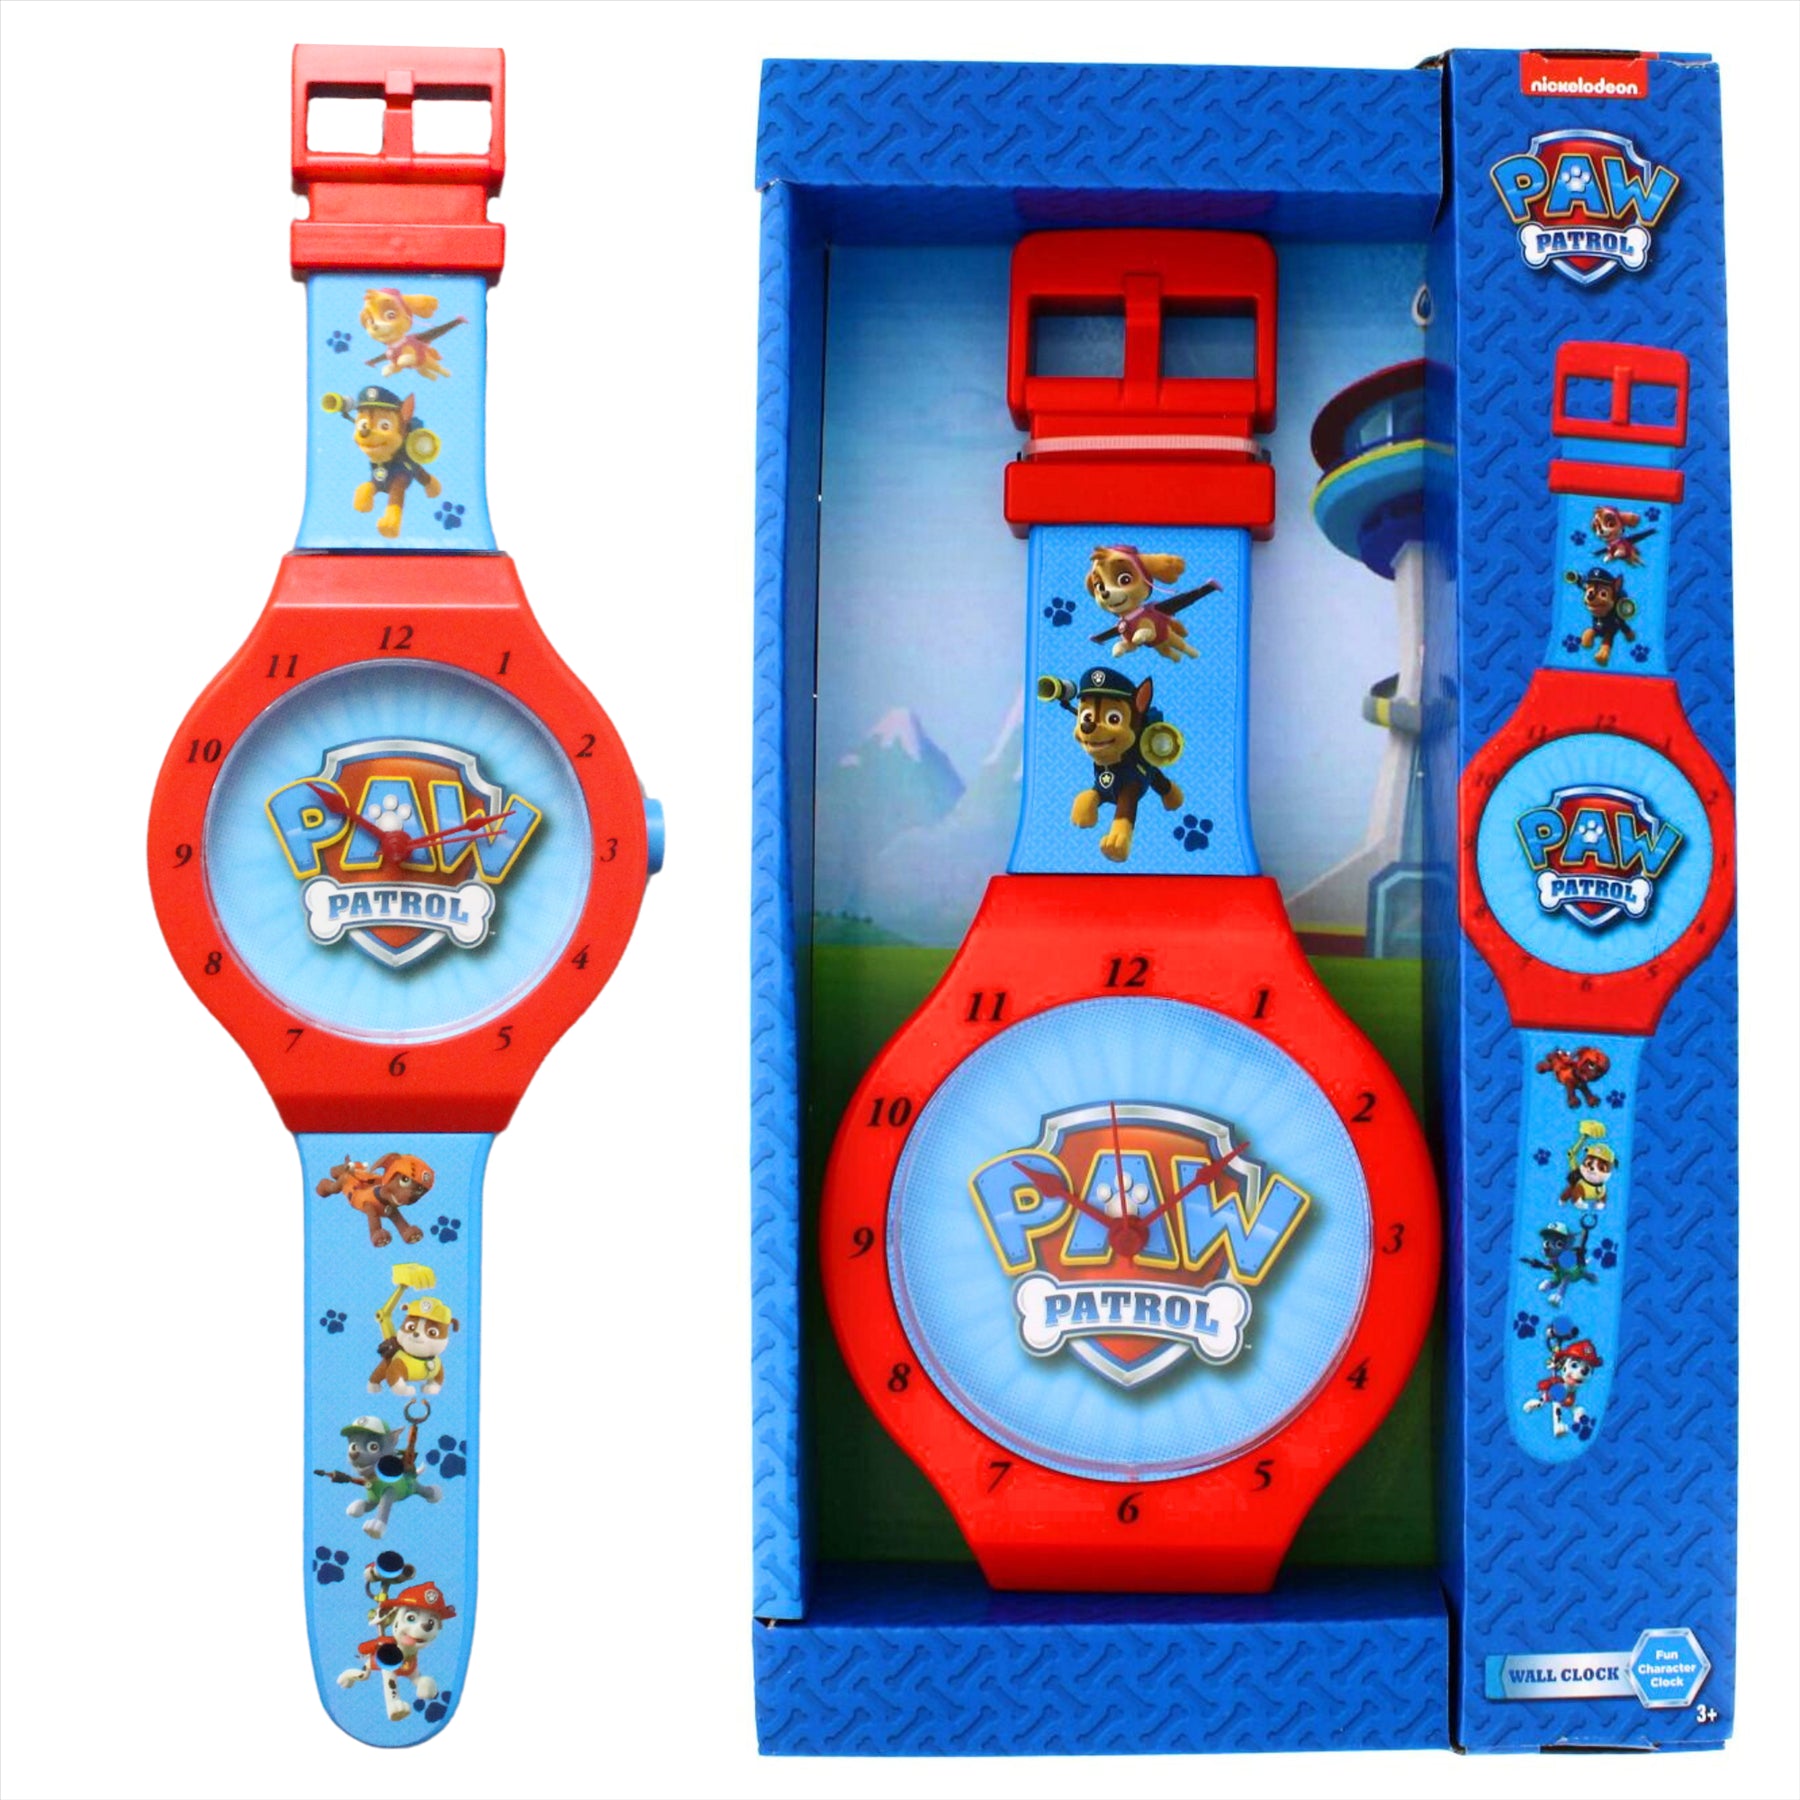 Paw Patrol Large Watch Themed Character Wall Clock